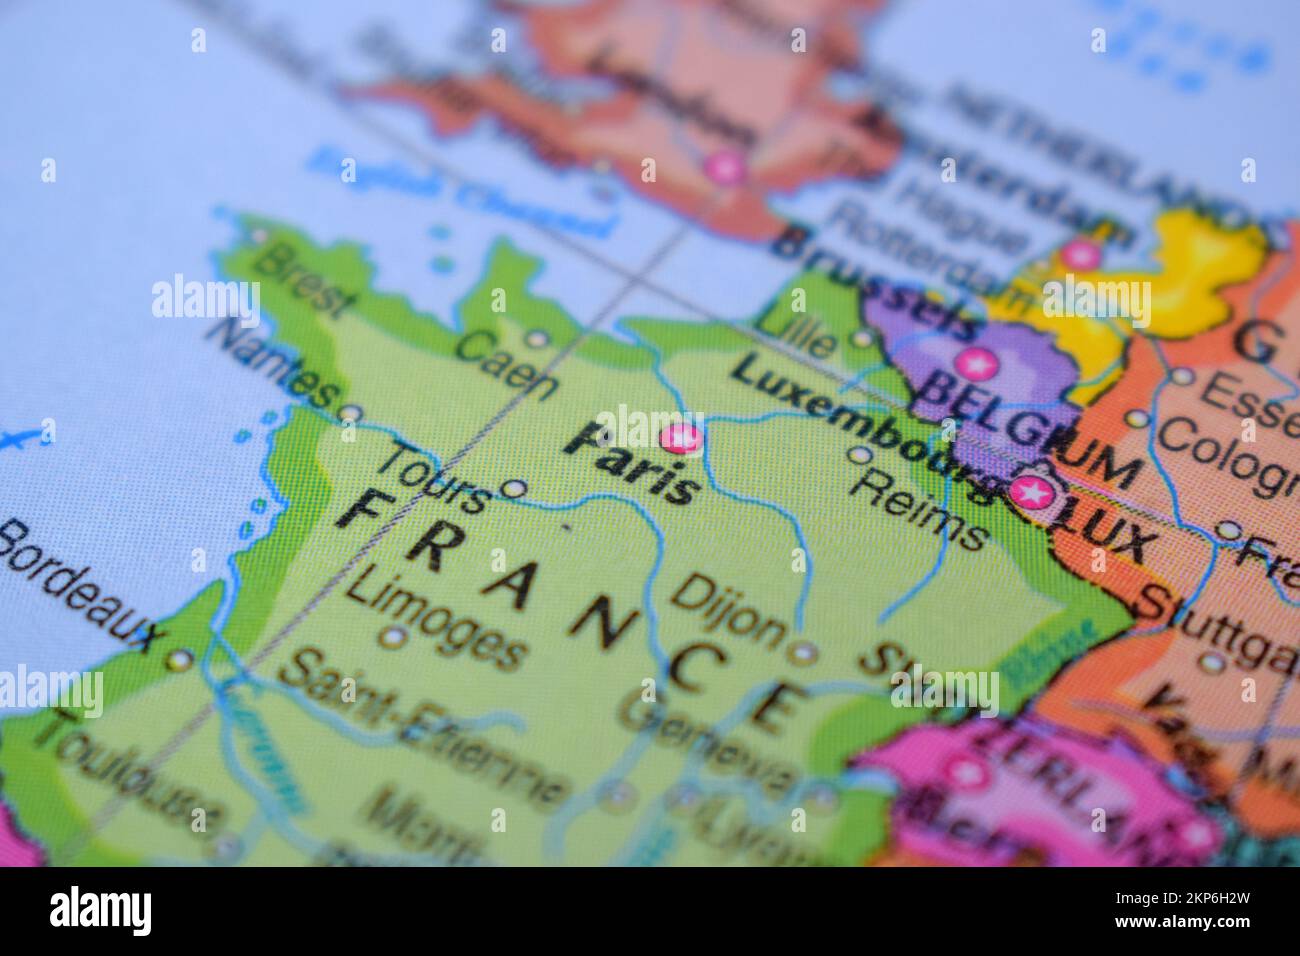 Paris on The Political Map Travel Concept Macro Close-Up View Stock Photo